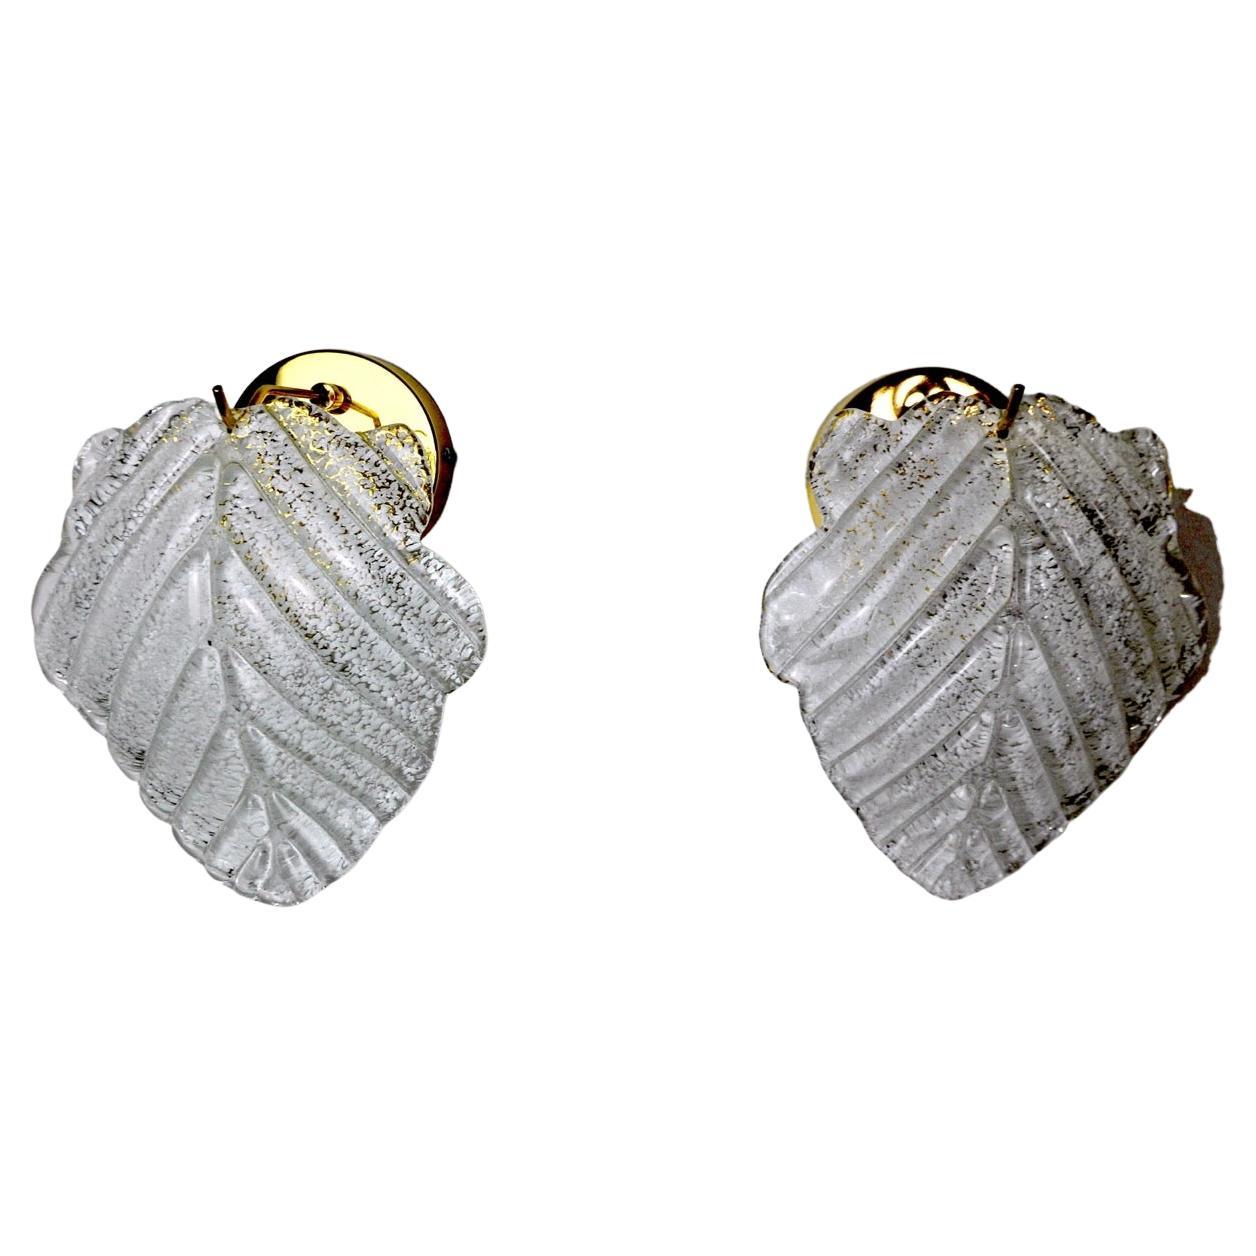 Pair of "Leaf" Sconces by Murano Mazzega Italy, 1970 For Sale